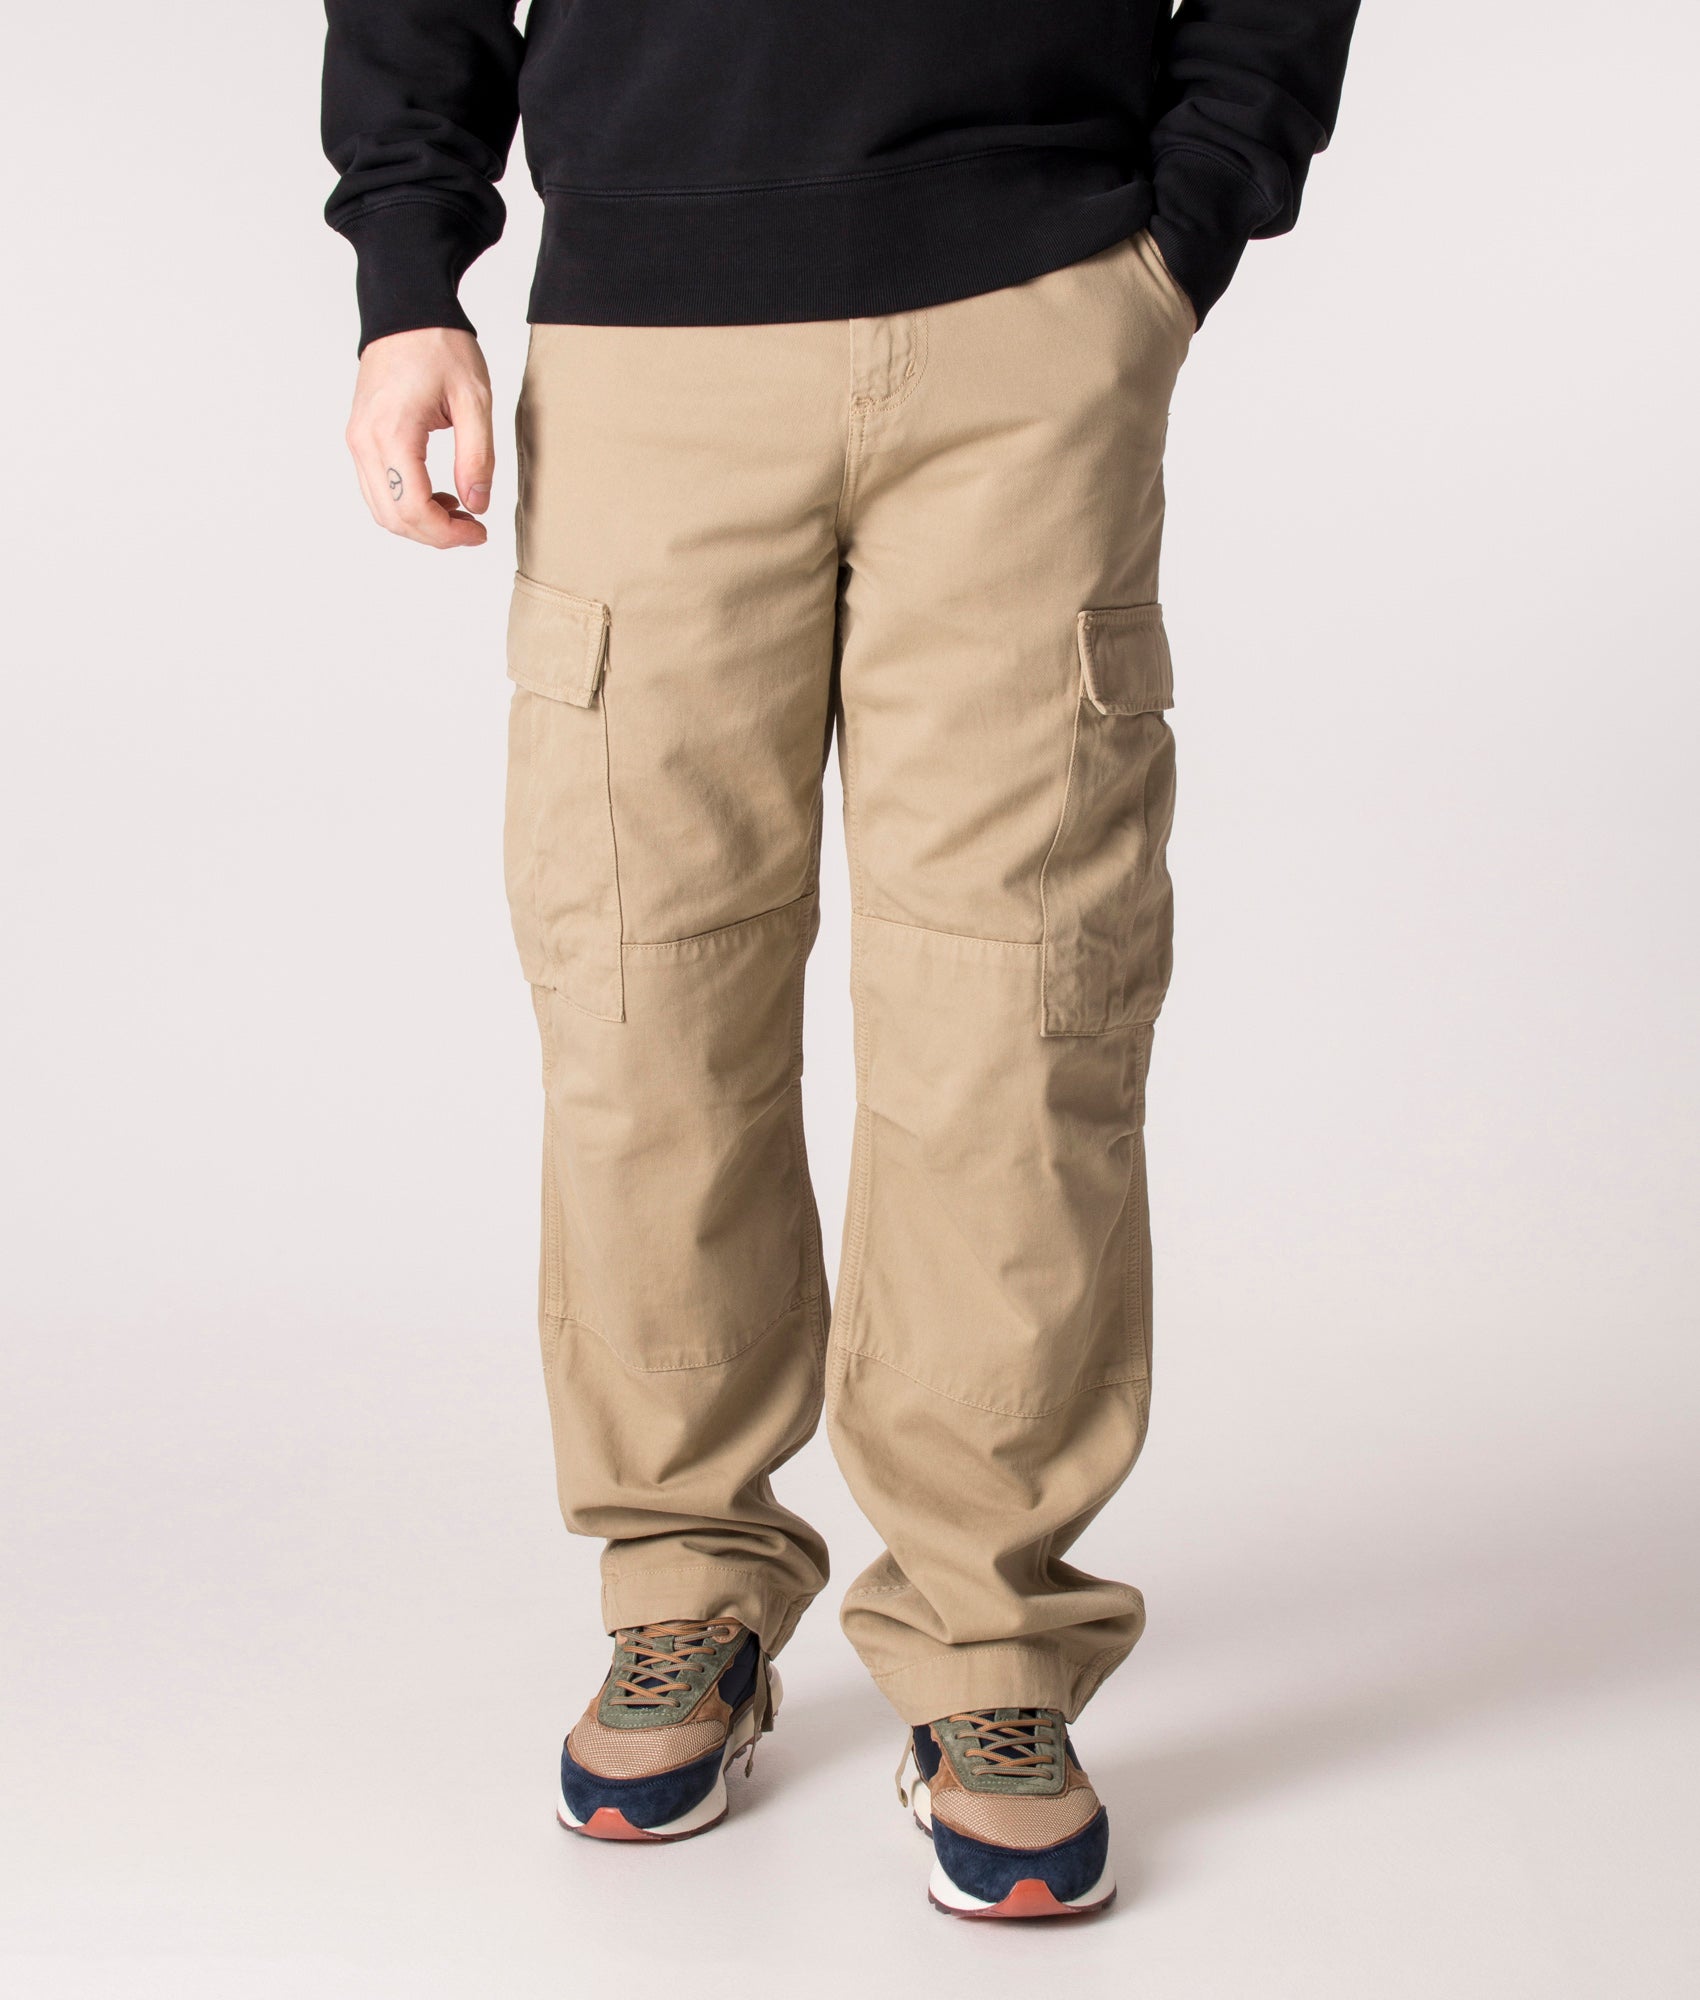 Carhartt WIP Mens Regular Fit Cargo Pants - Colour: 0VZGD Ammonite - Size: 36W